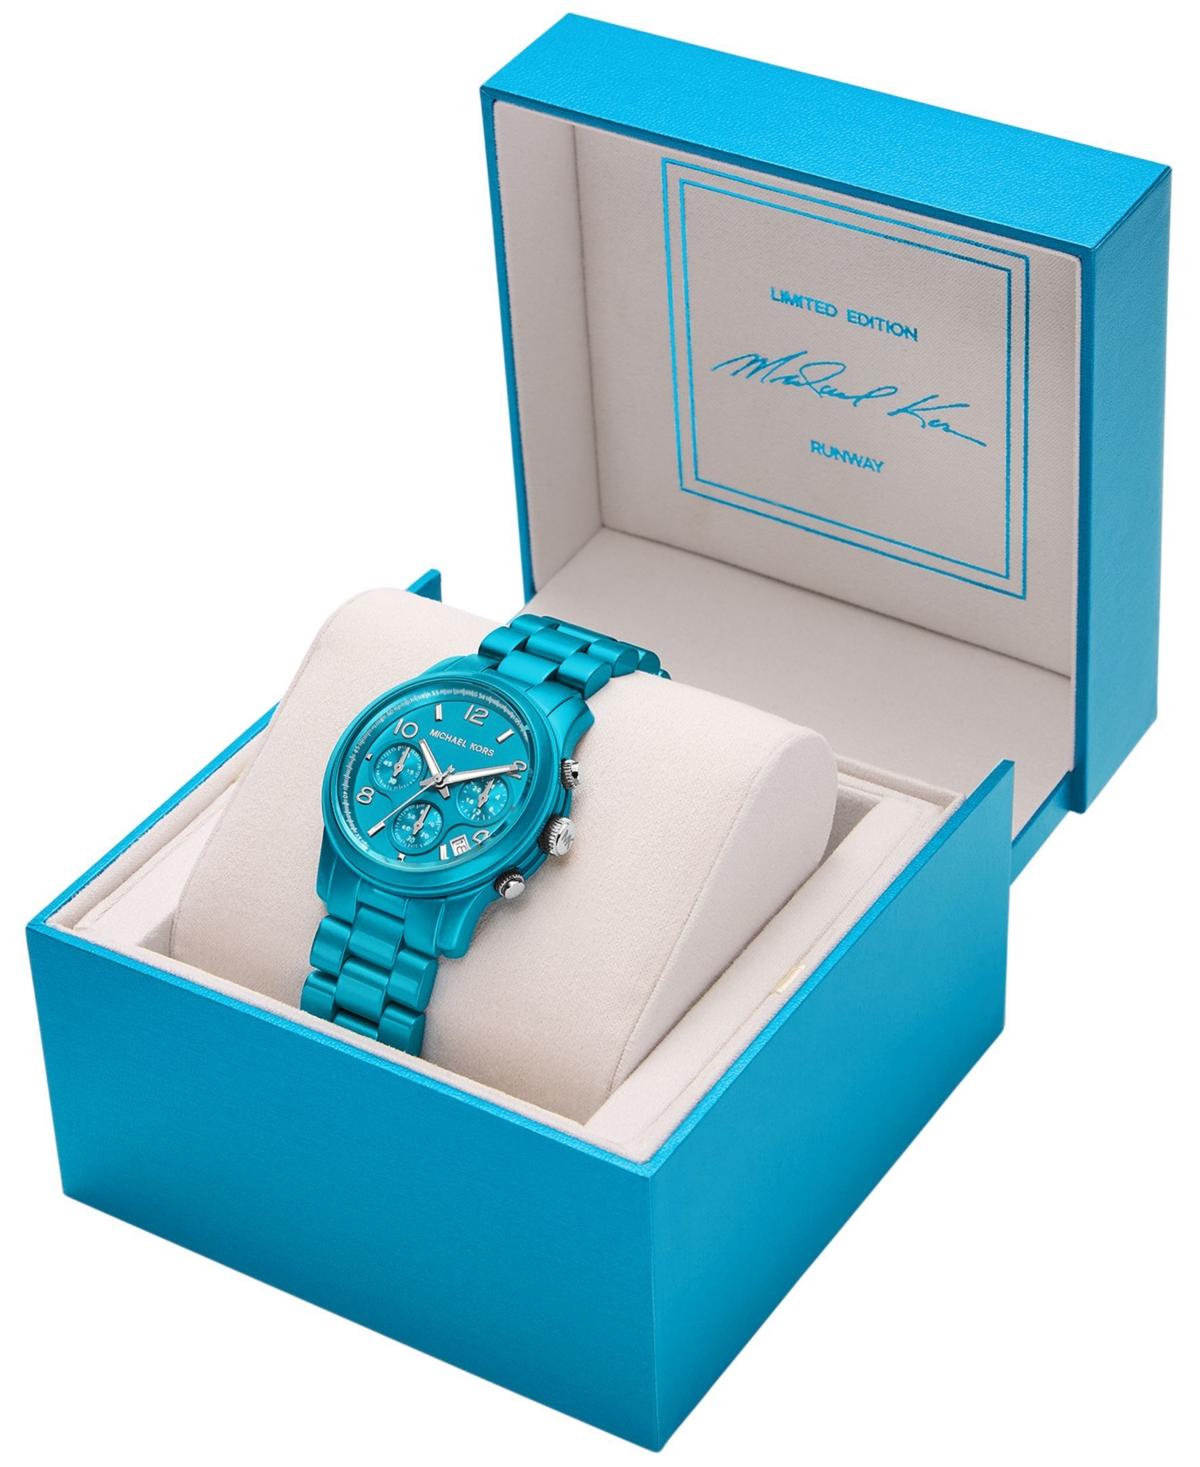 38mm Chronograph in Lyst Runway Limited | Kors Blue Steel Michael Watch Edition Stainless